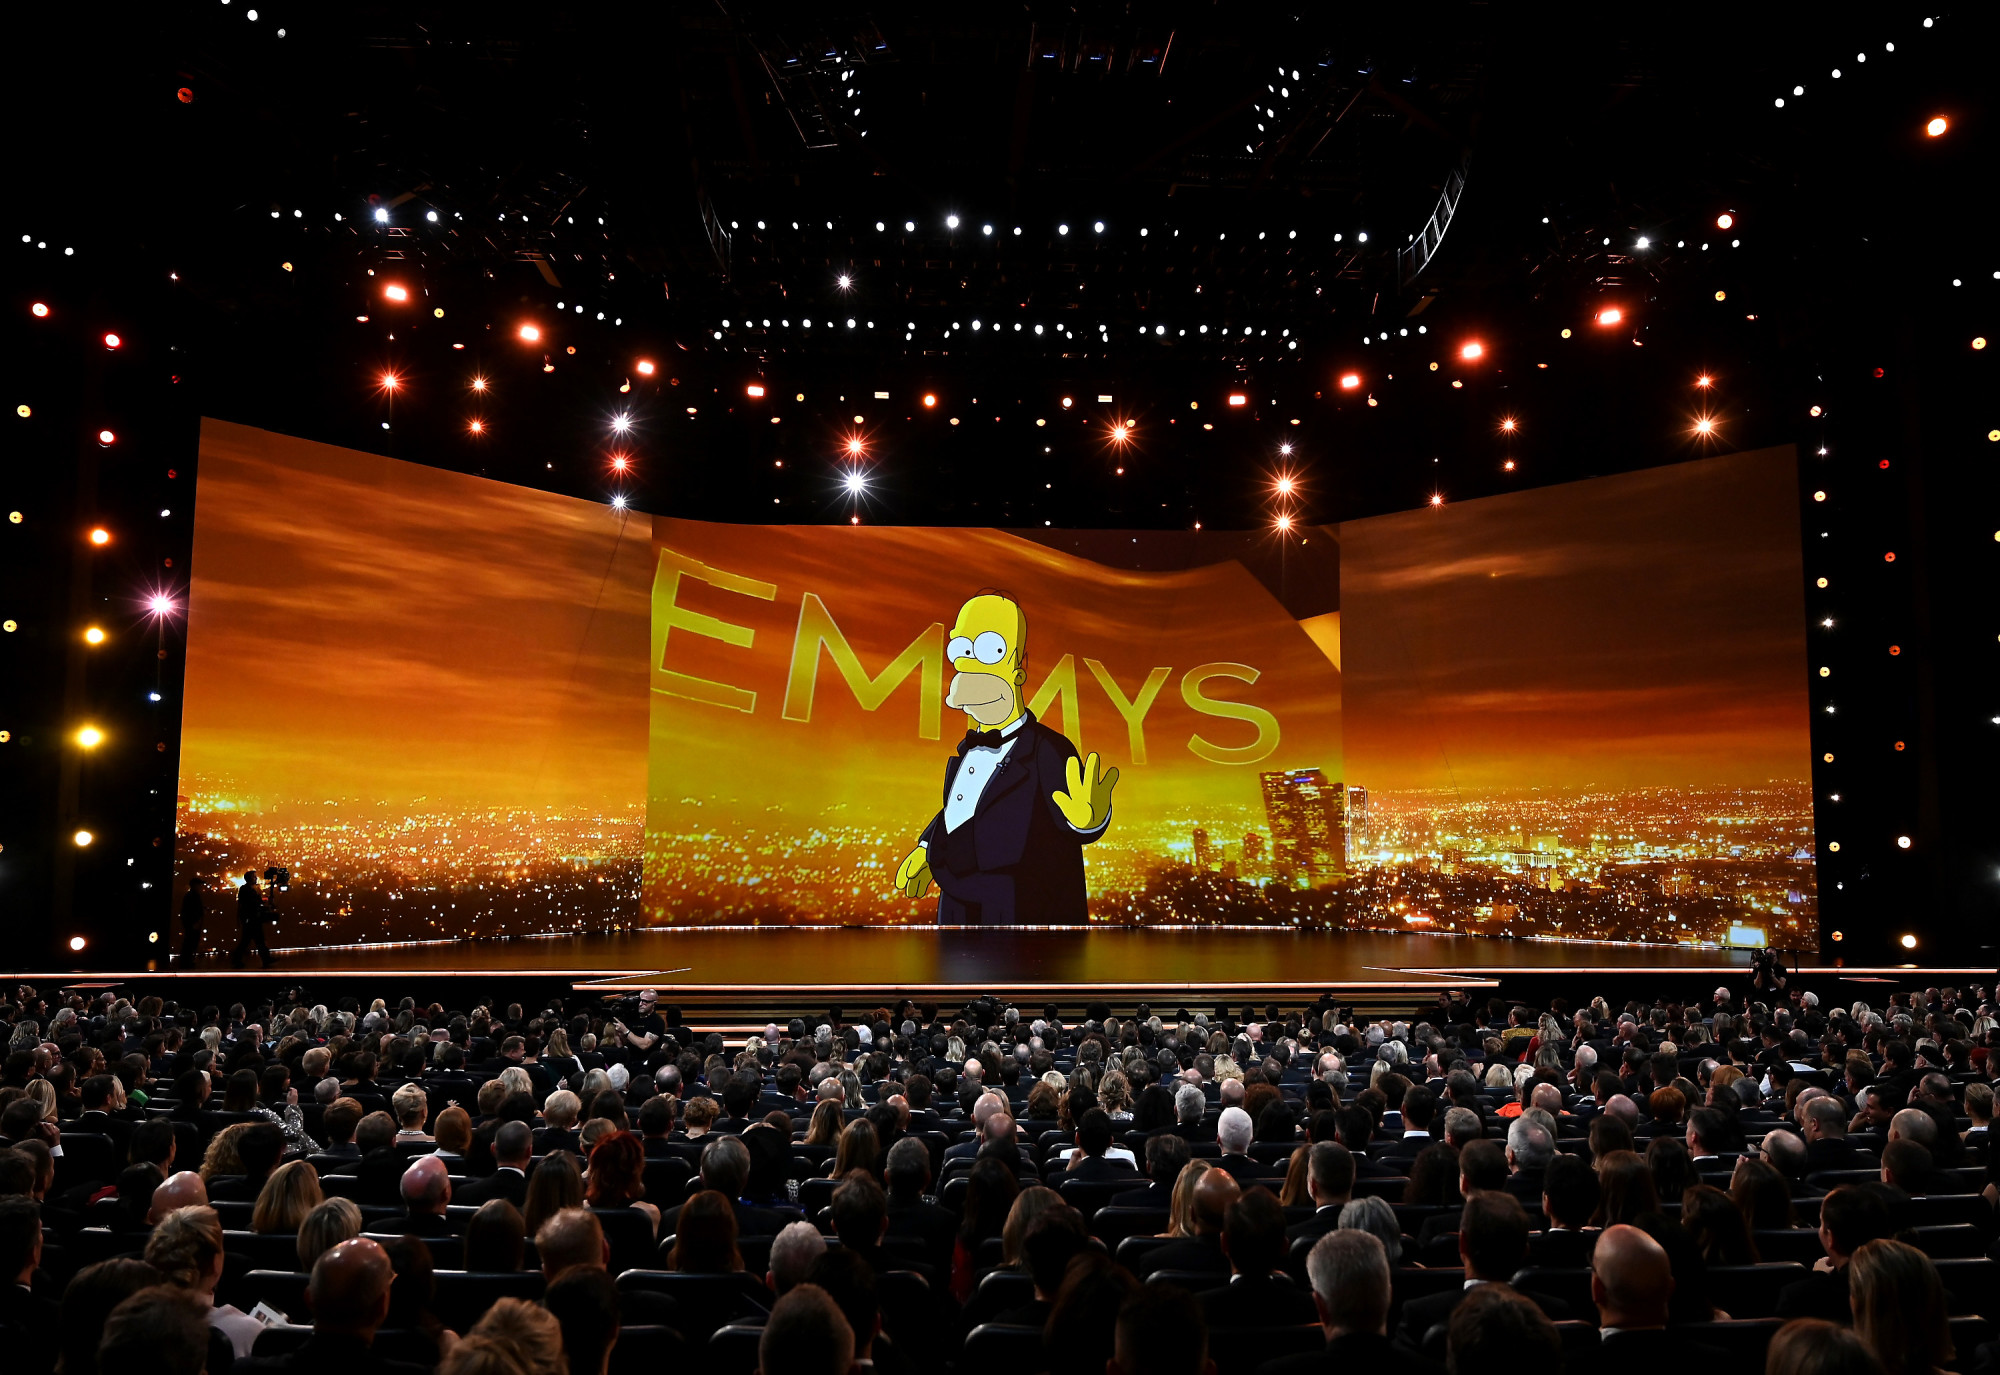 emmys-2019-overall-production.jpg